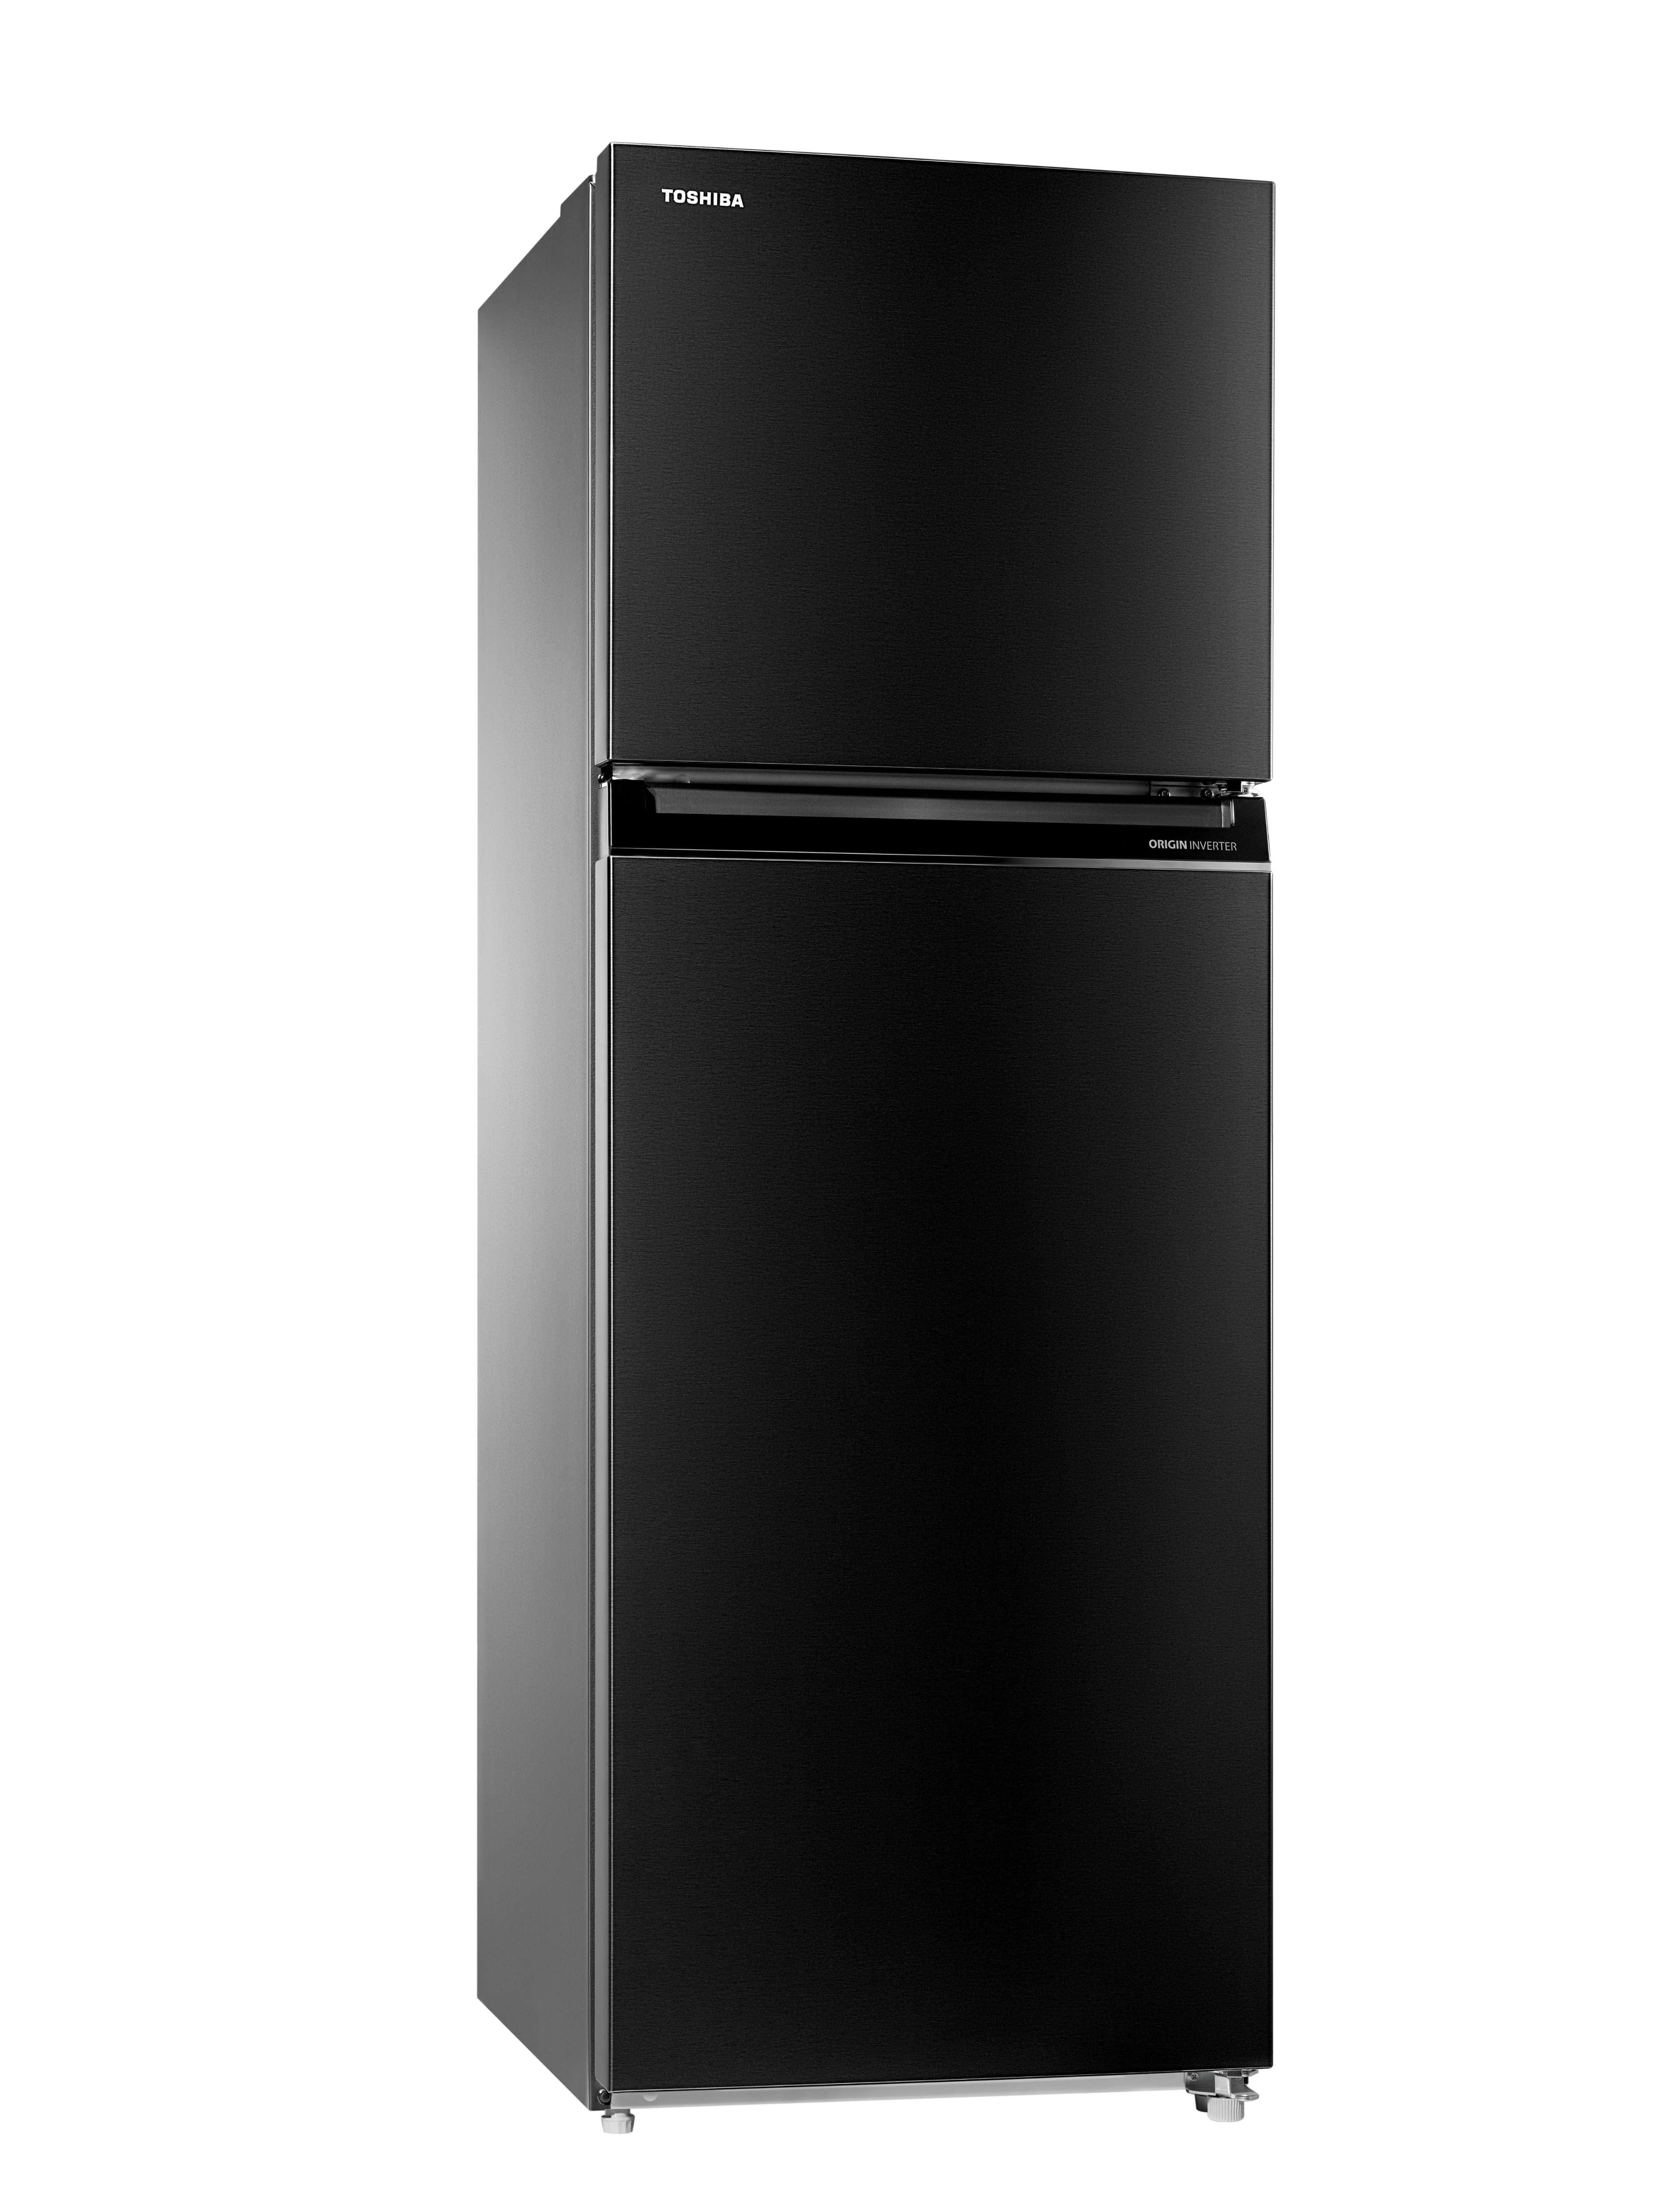 338 L, Real Inverter Refrigerator with AirFall cooling Technology.